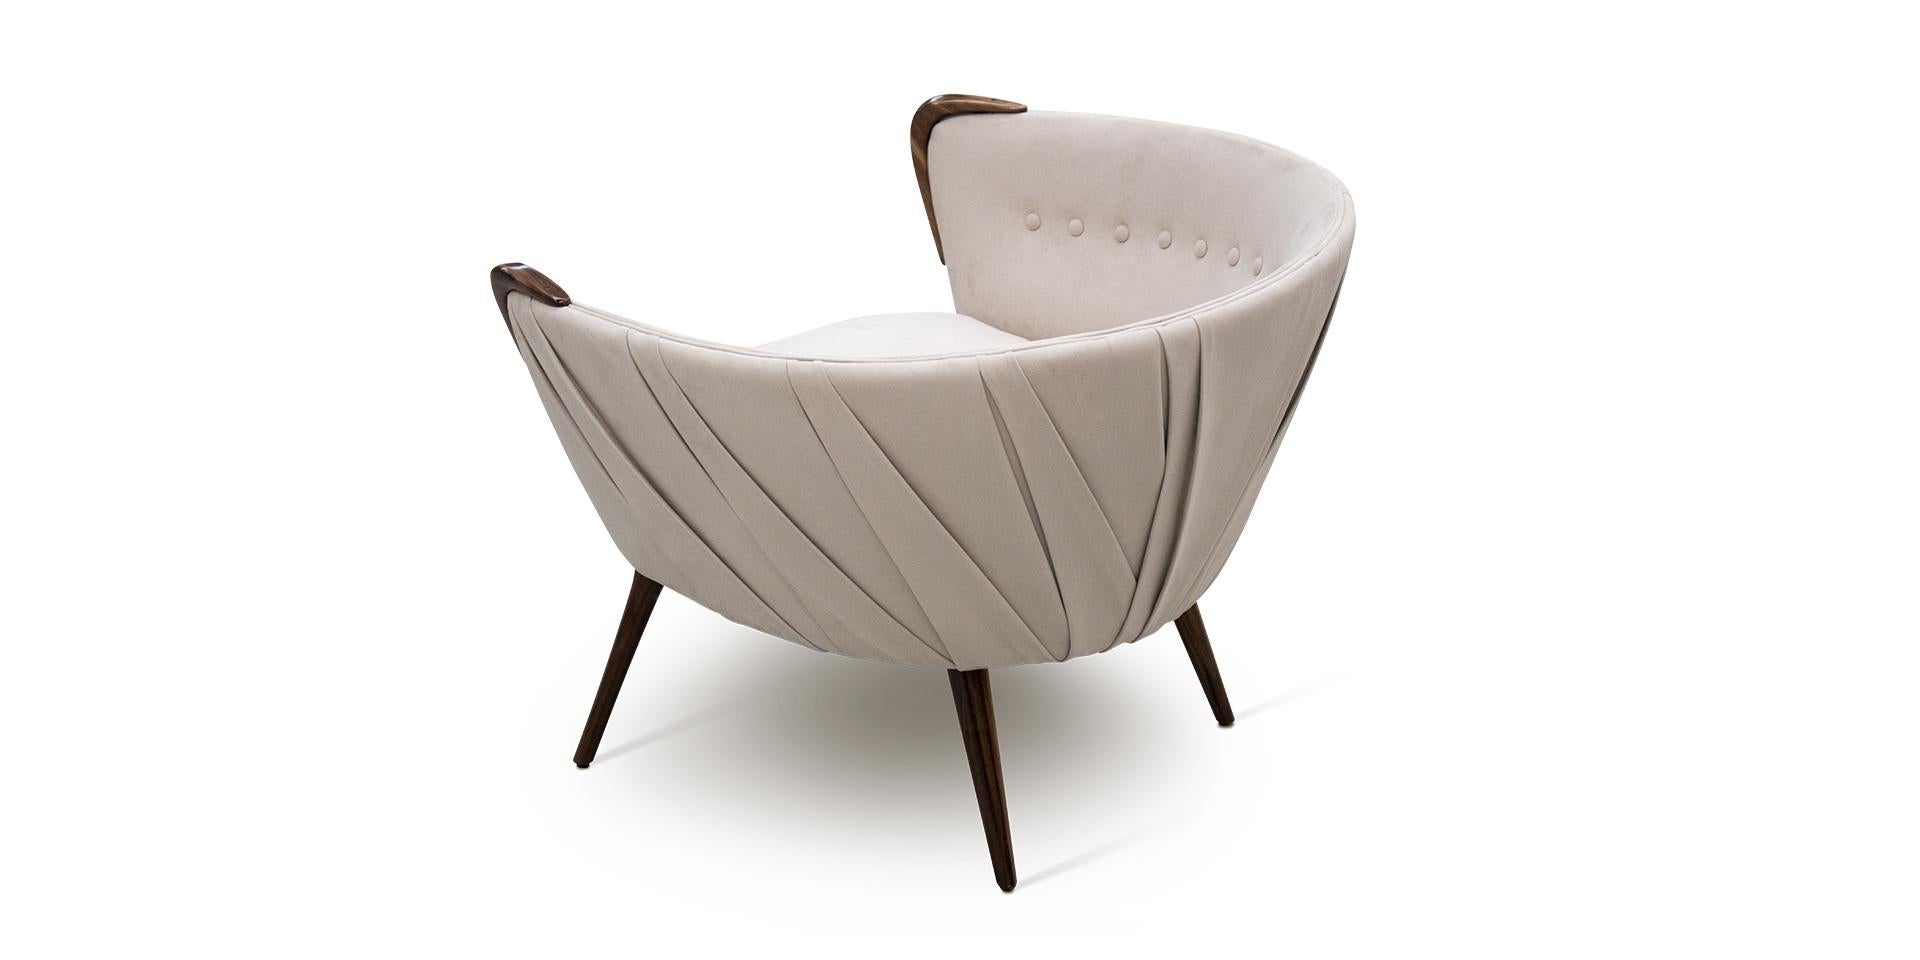 Takeami armchair is full of details on its back side. The contemporary piece will add personality to the living room. Interior designers use this piece in contemporary decorations.